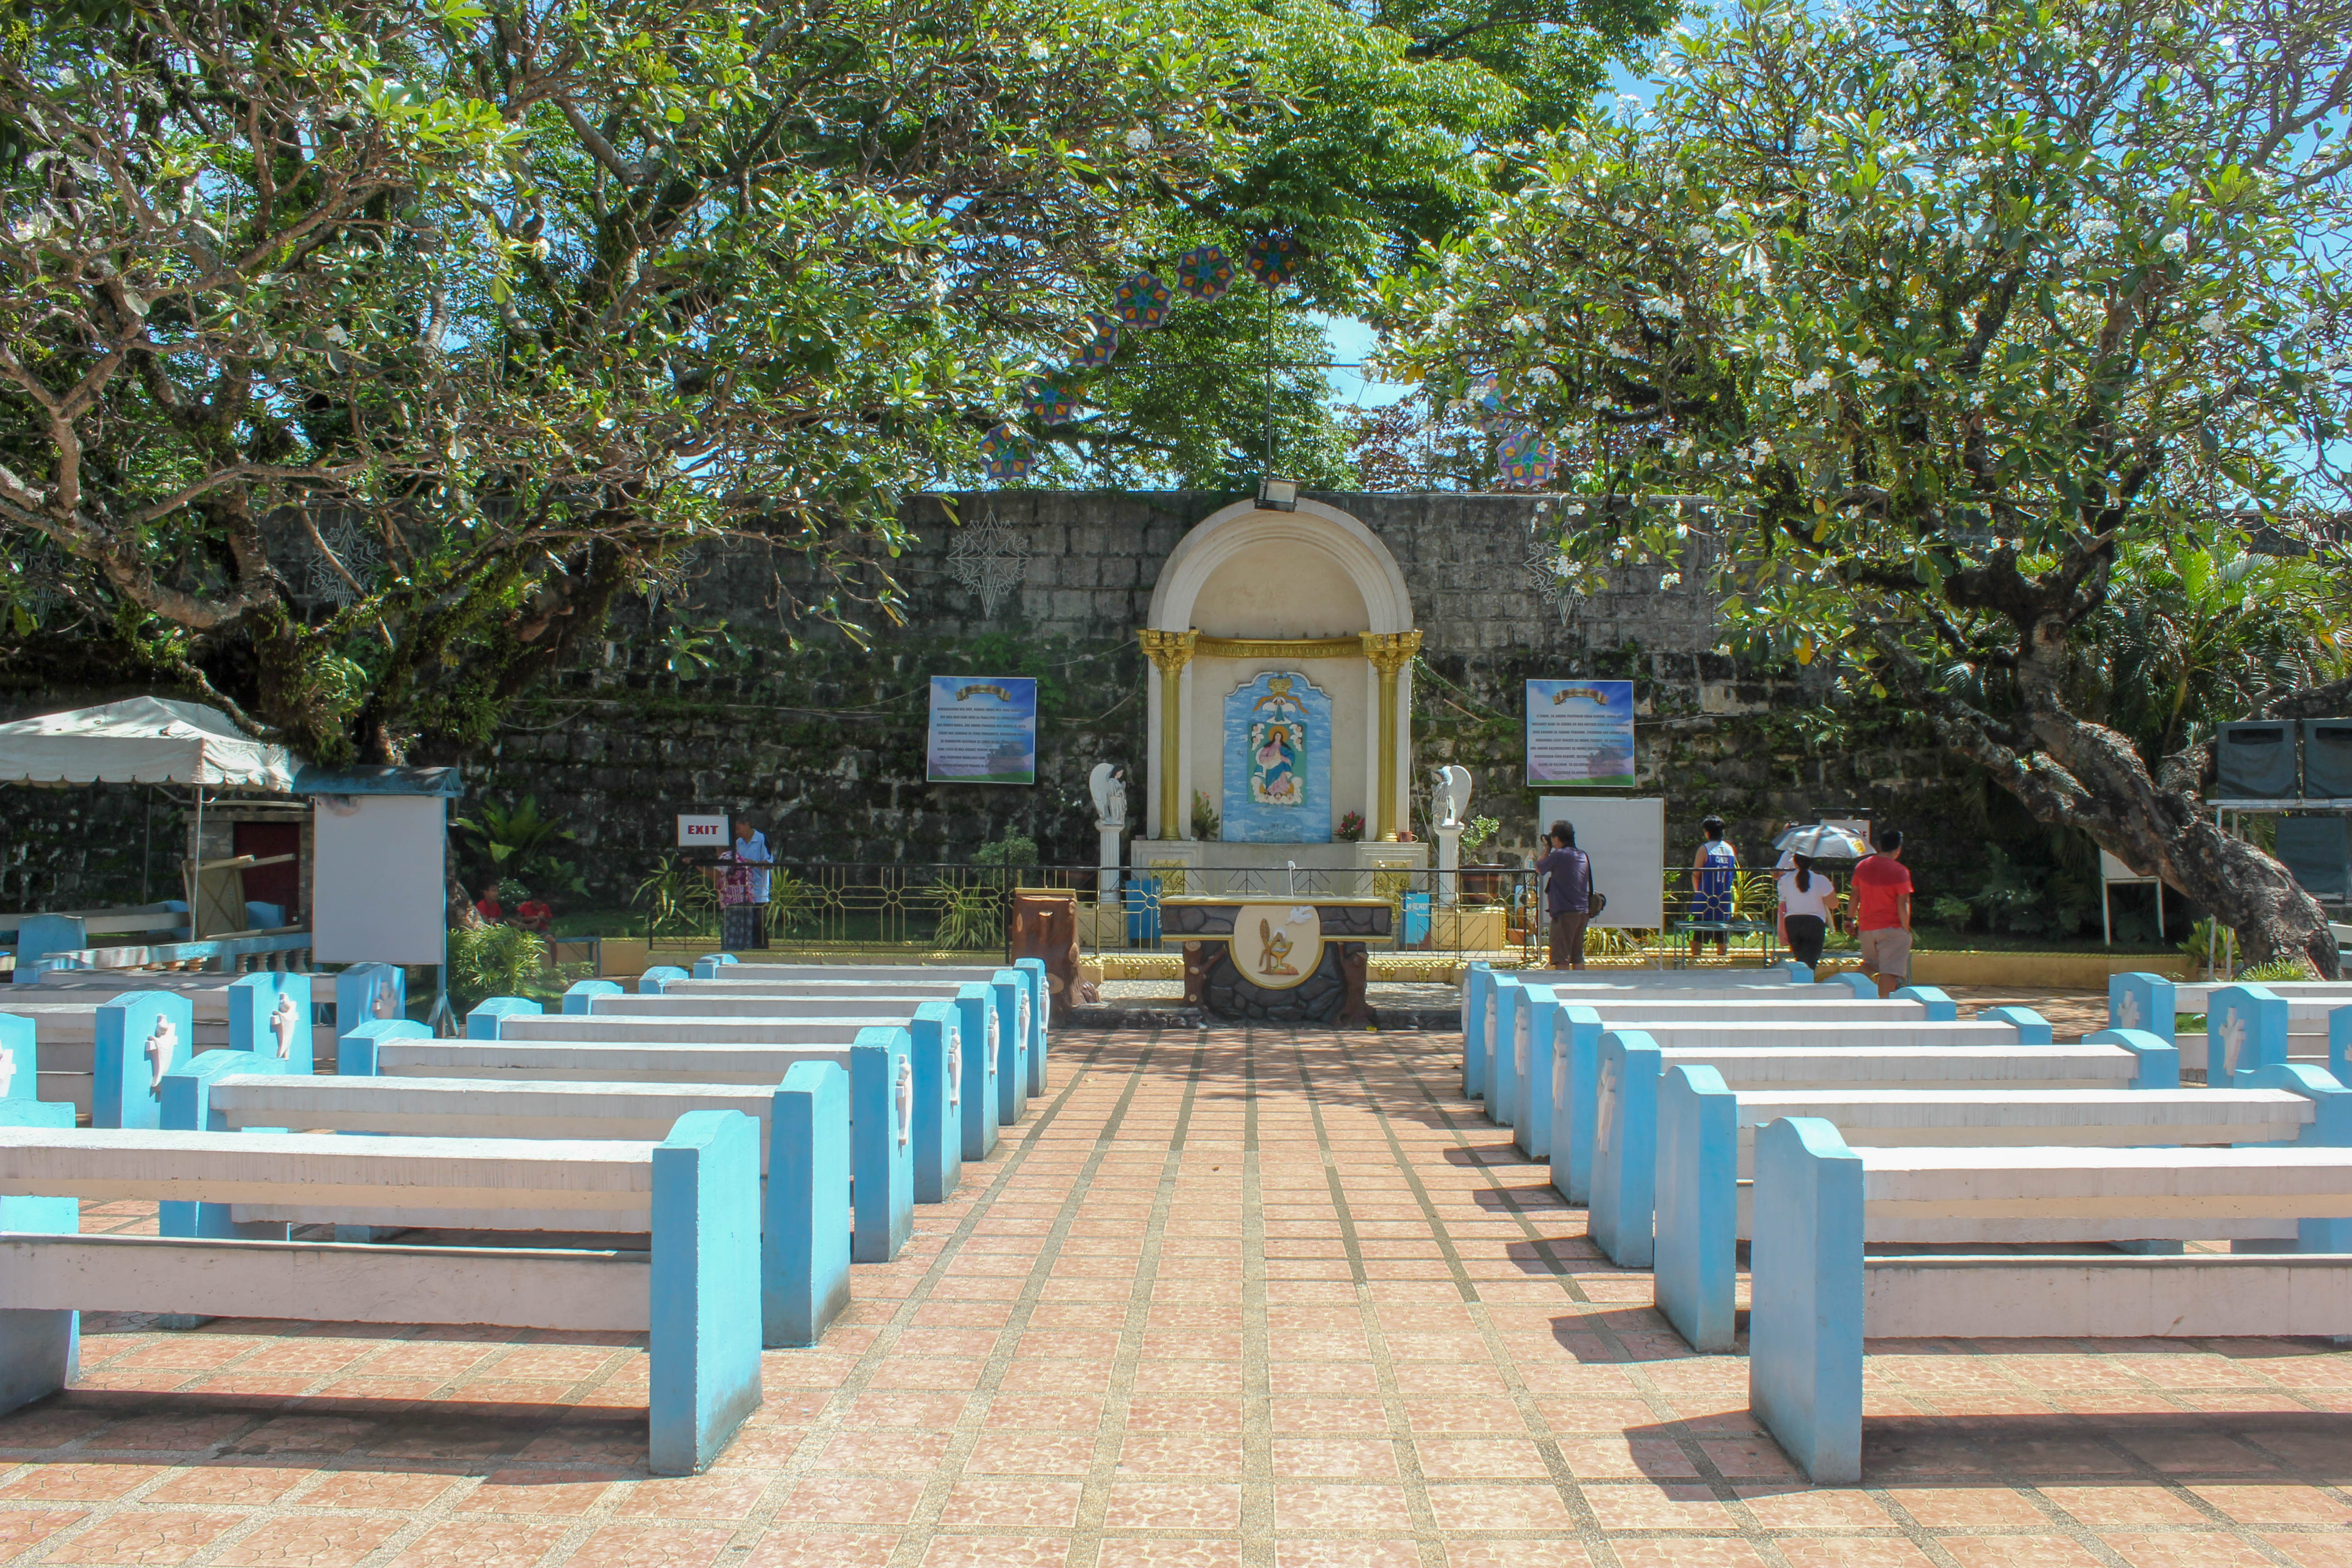 The engraved image of the Our Lady of Triumph of the Cross at the Cotta Shrine is visited by devotees from all over the country specially on its feast day, July 16.